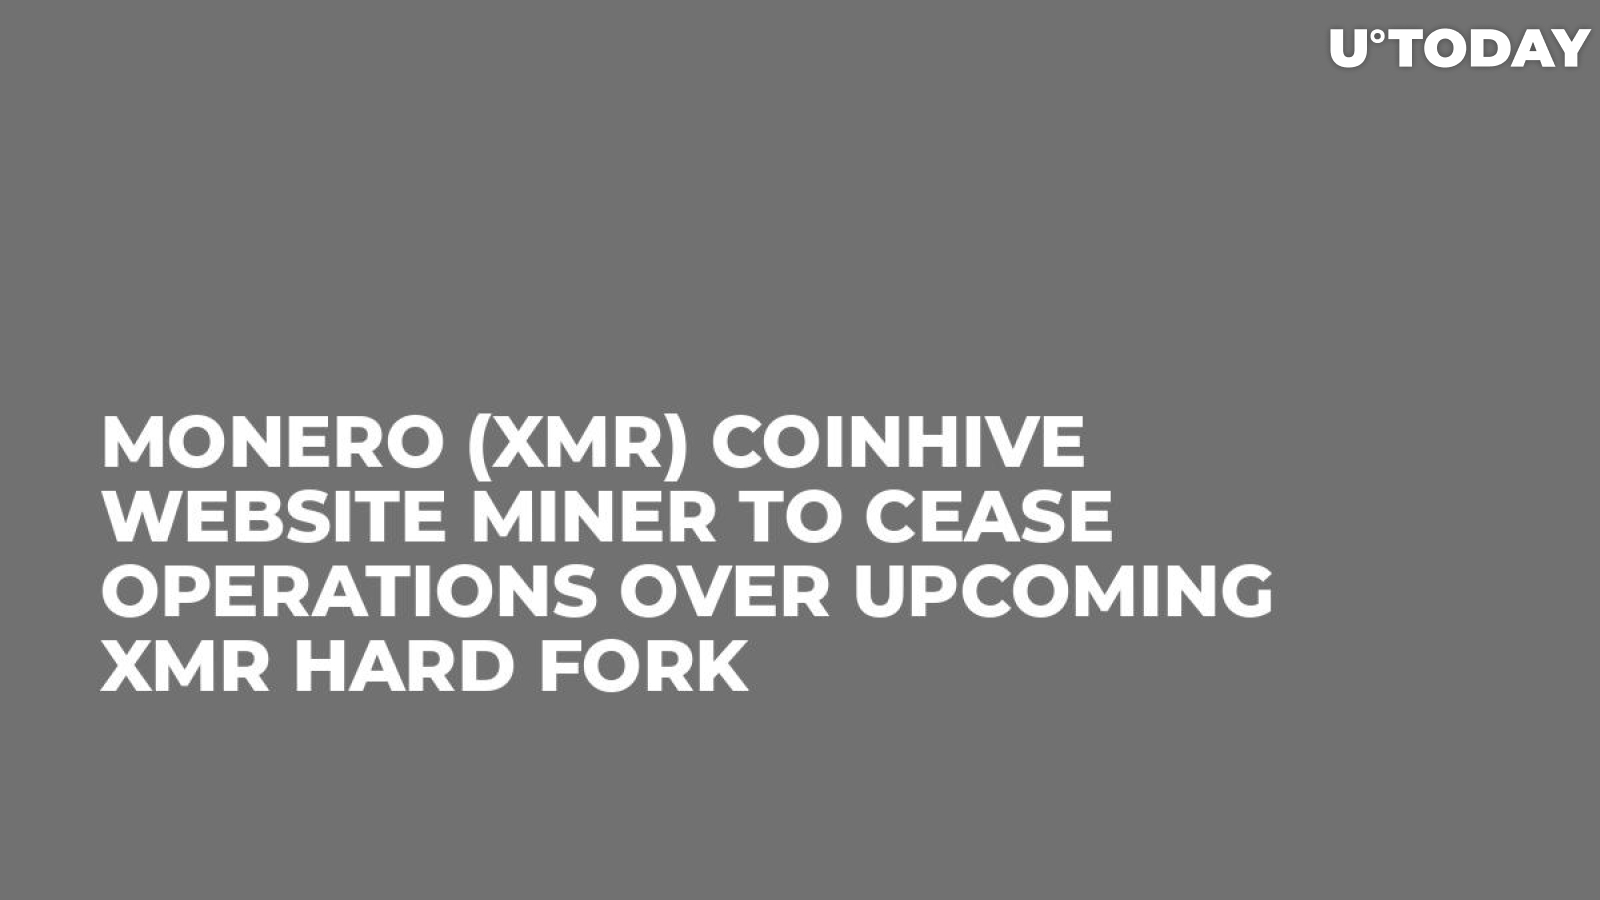 Monero (XMR) Coinhive Website Miner to Cease Operations over Upcoming XMR Hard Fork